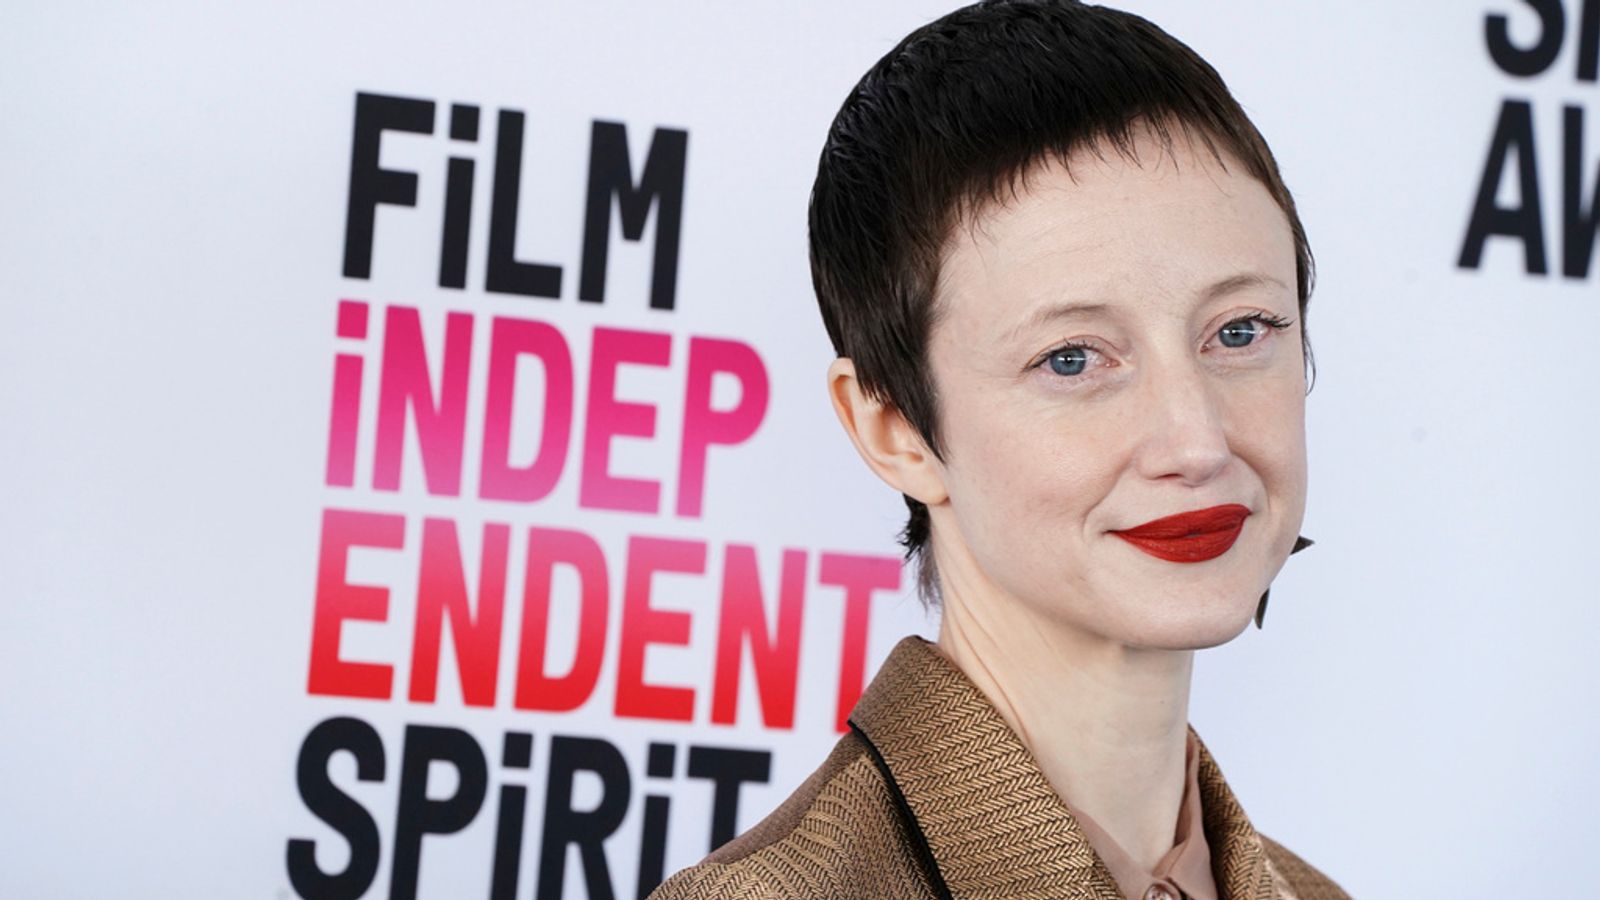 Oscars 2023: How the controversy around Andrea Riseborough's nomination could change the way campaigning works